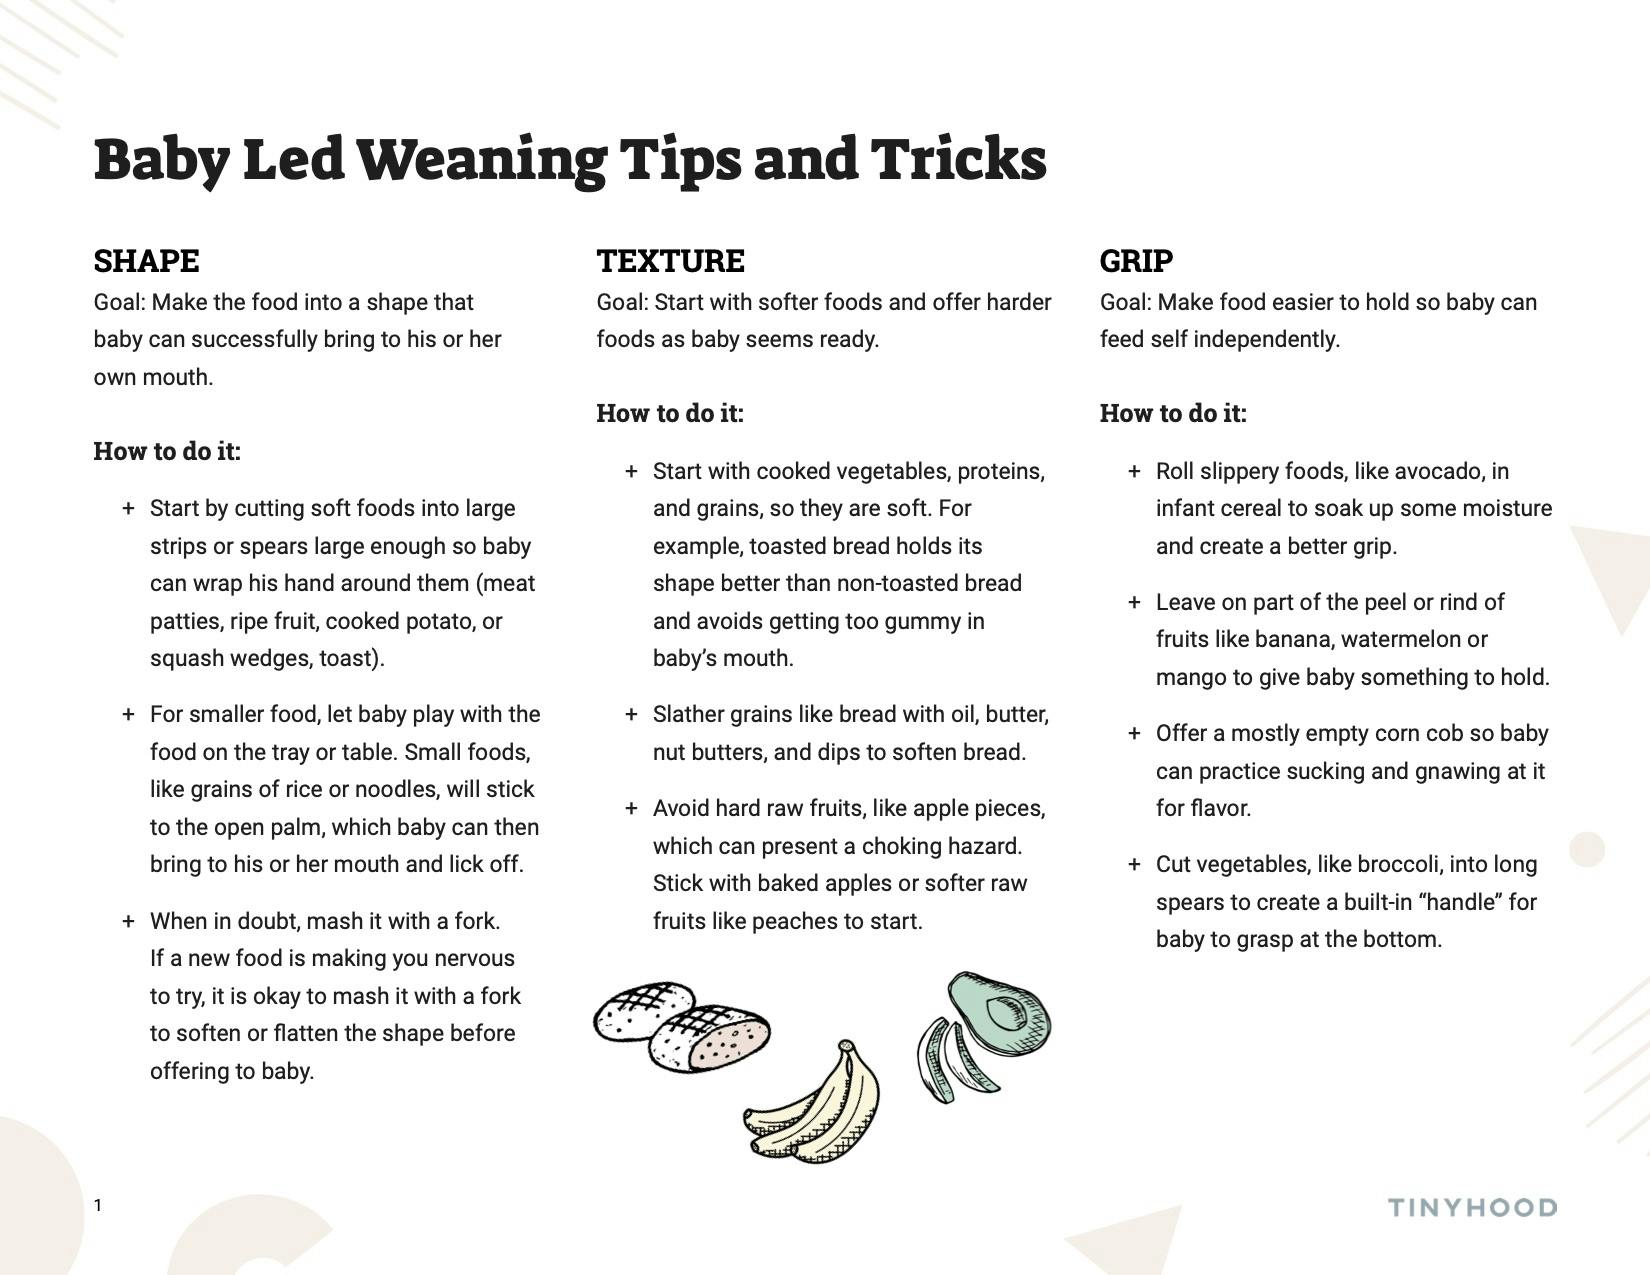 Preview image of Handout: Baby-Led Weaning Tips and Tricks